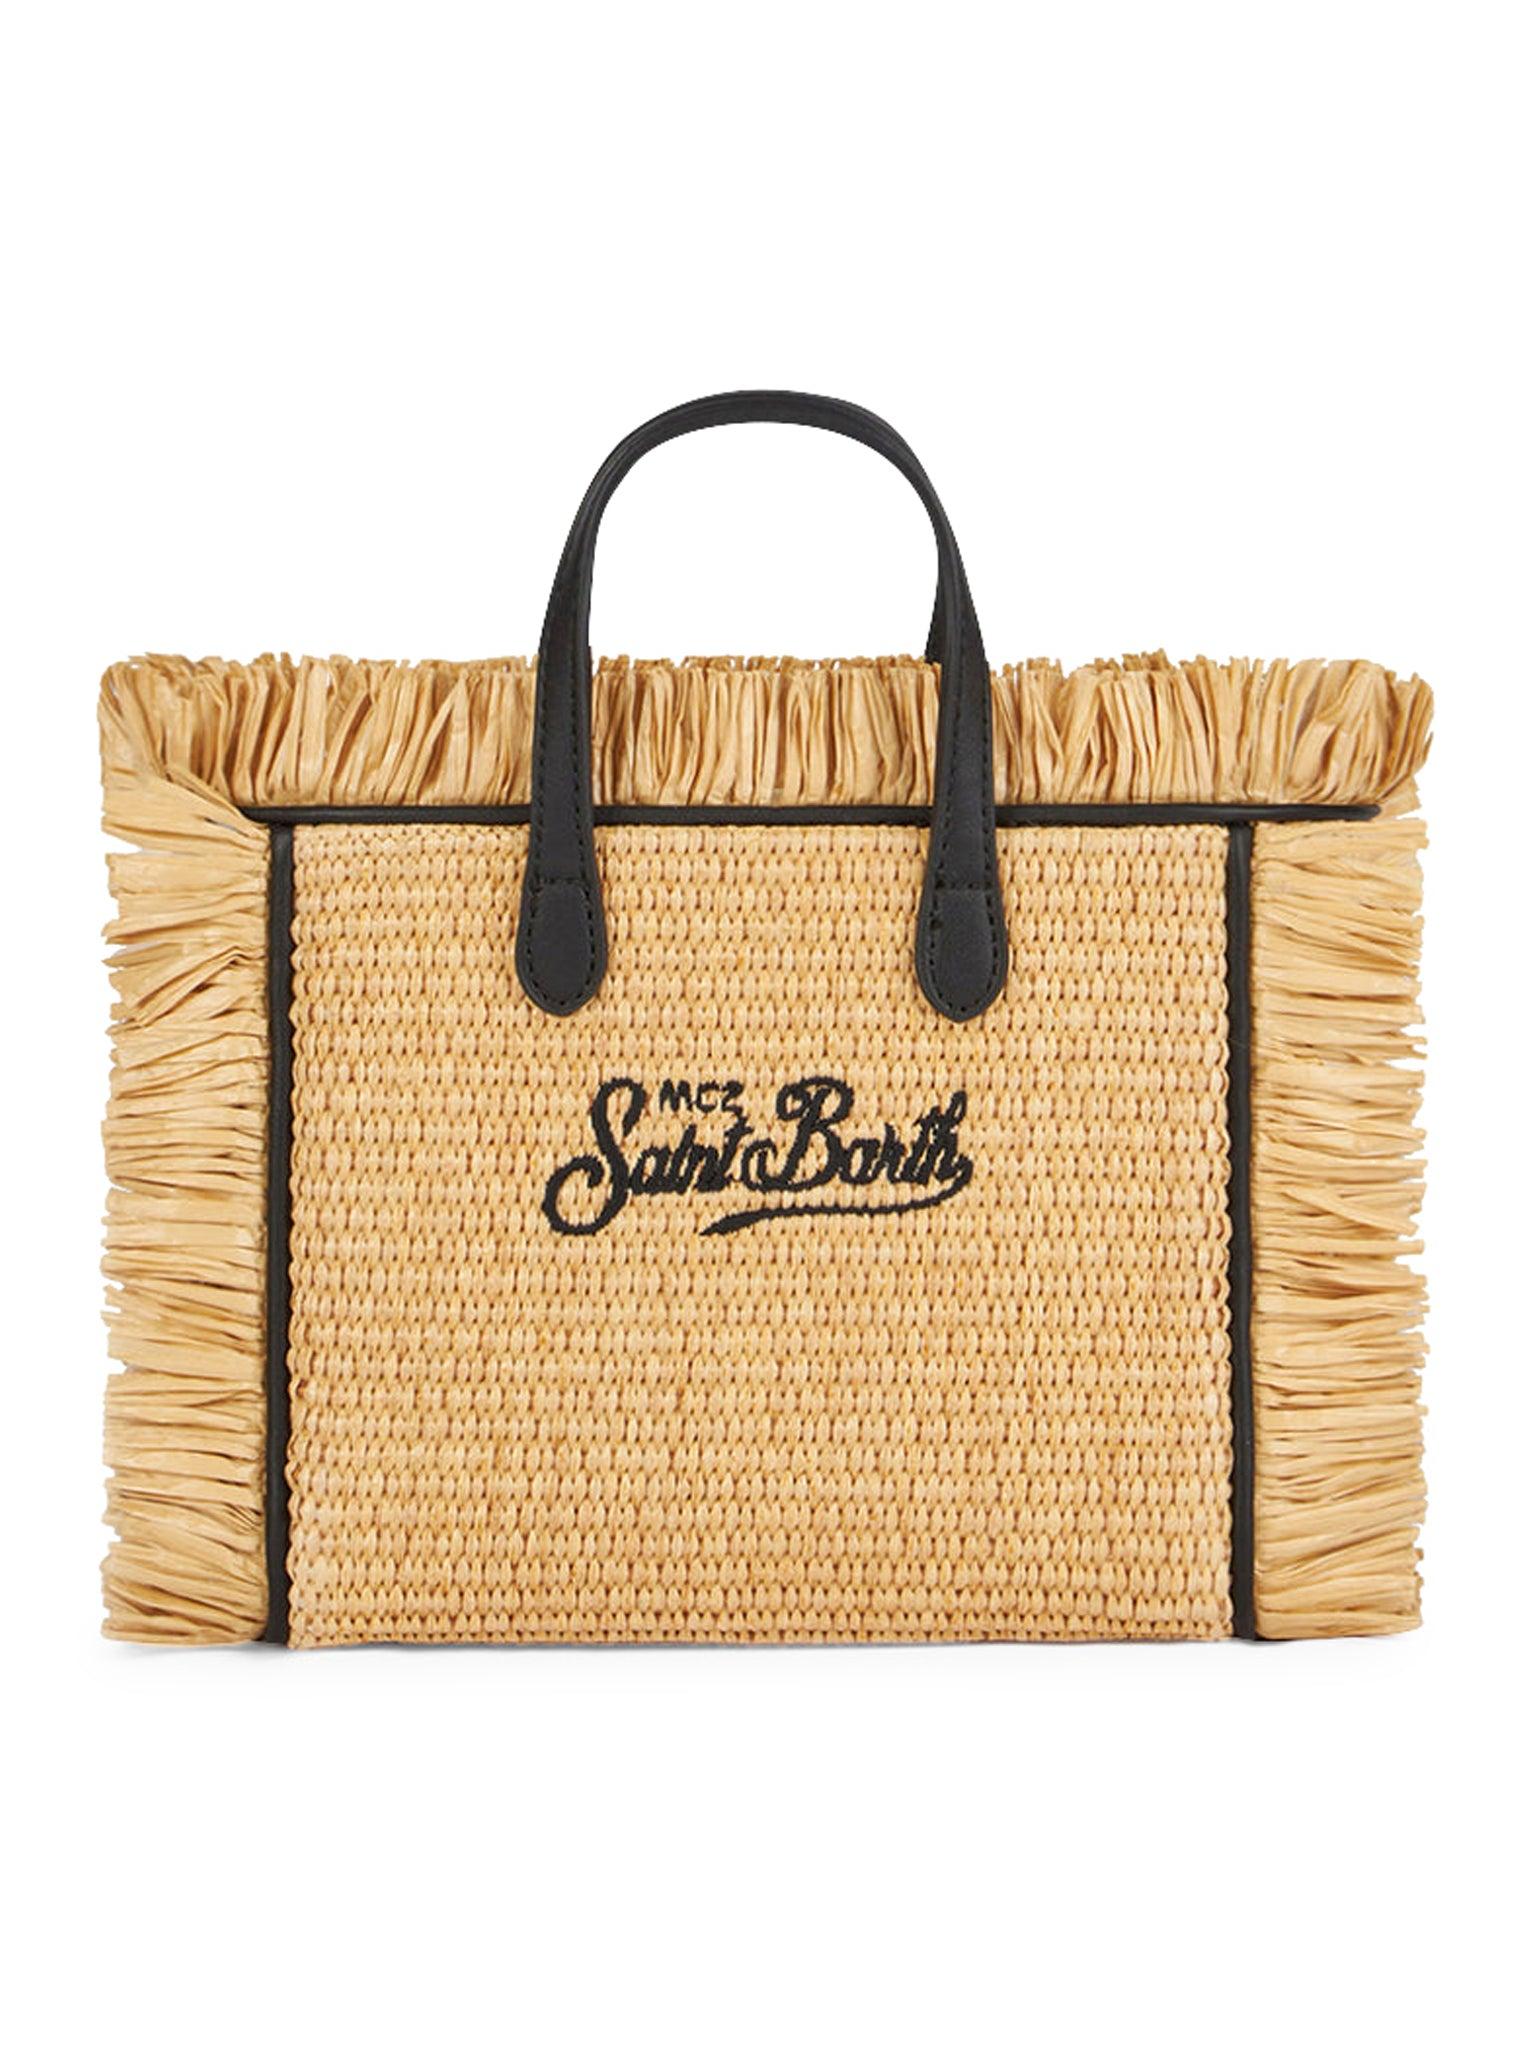 Mc2 Saint Barth Vanity Mini Bag In Straw With Embroidery in Natural | Lyst